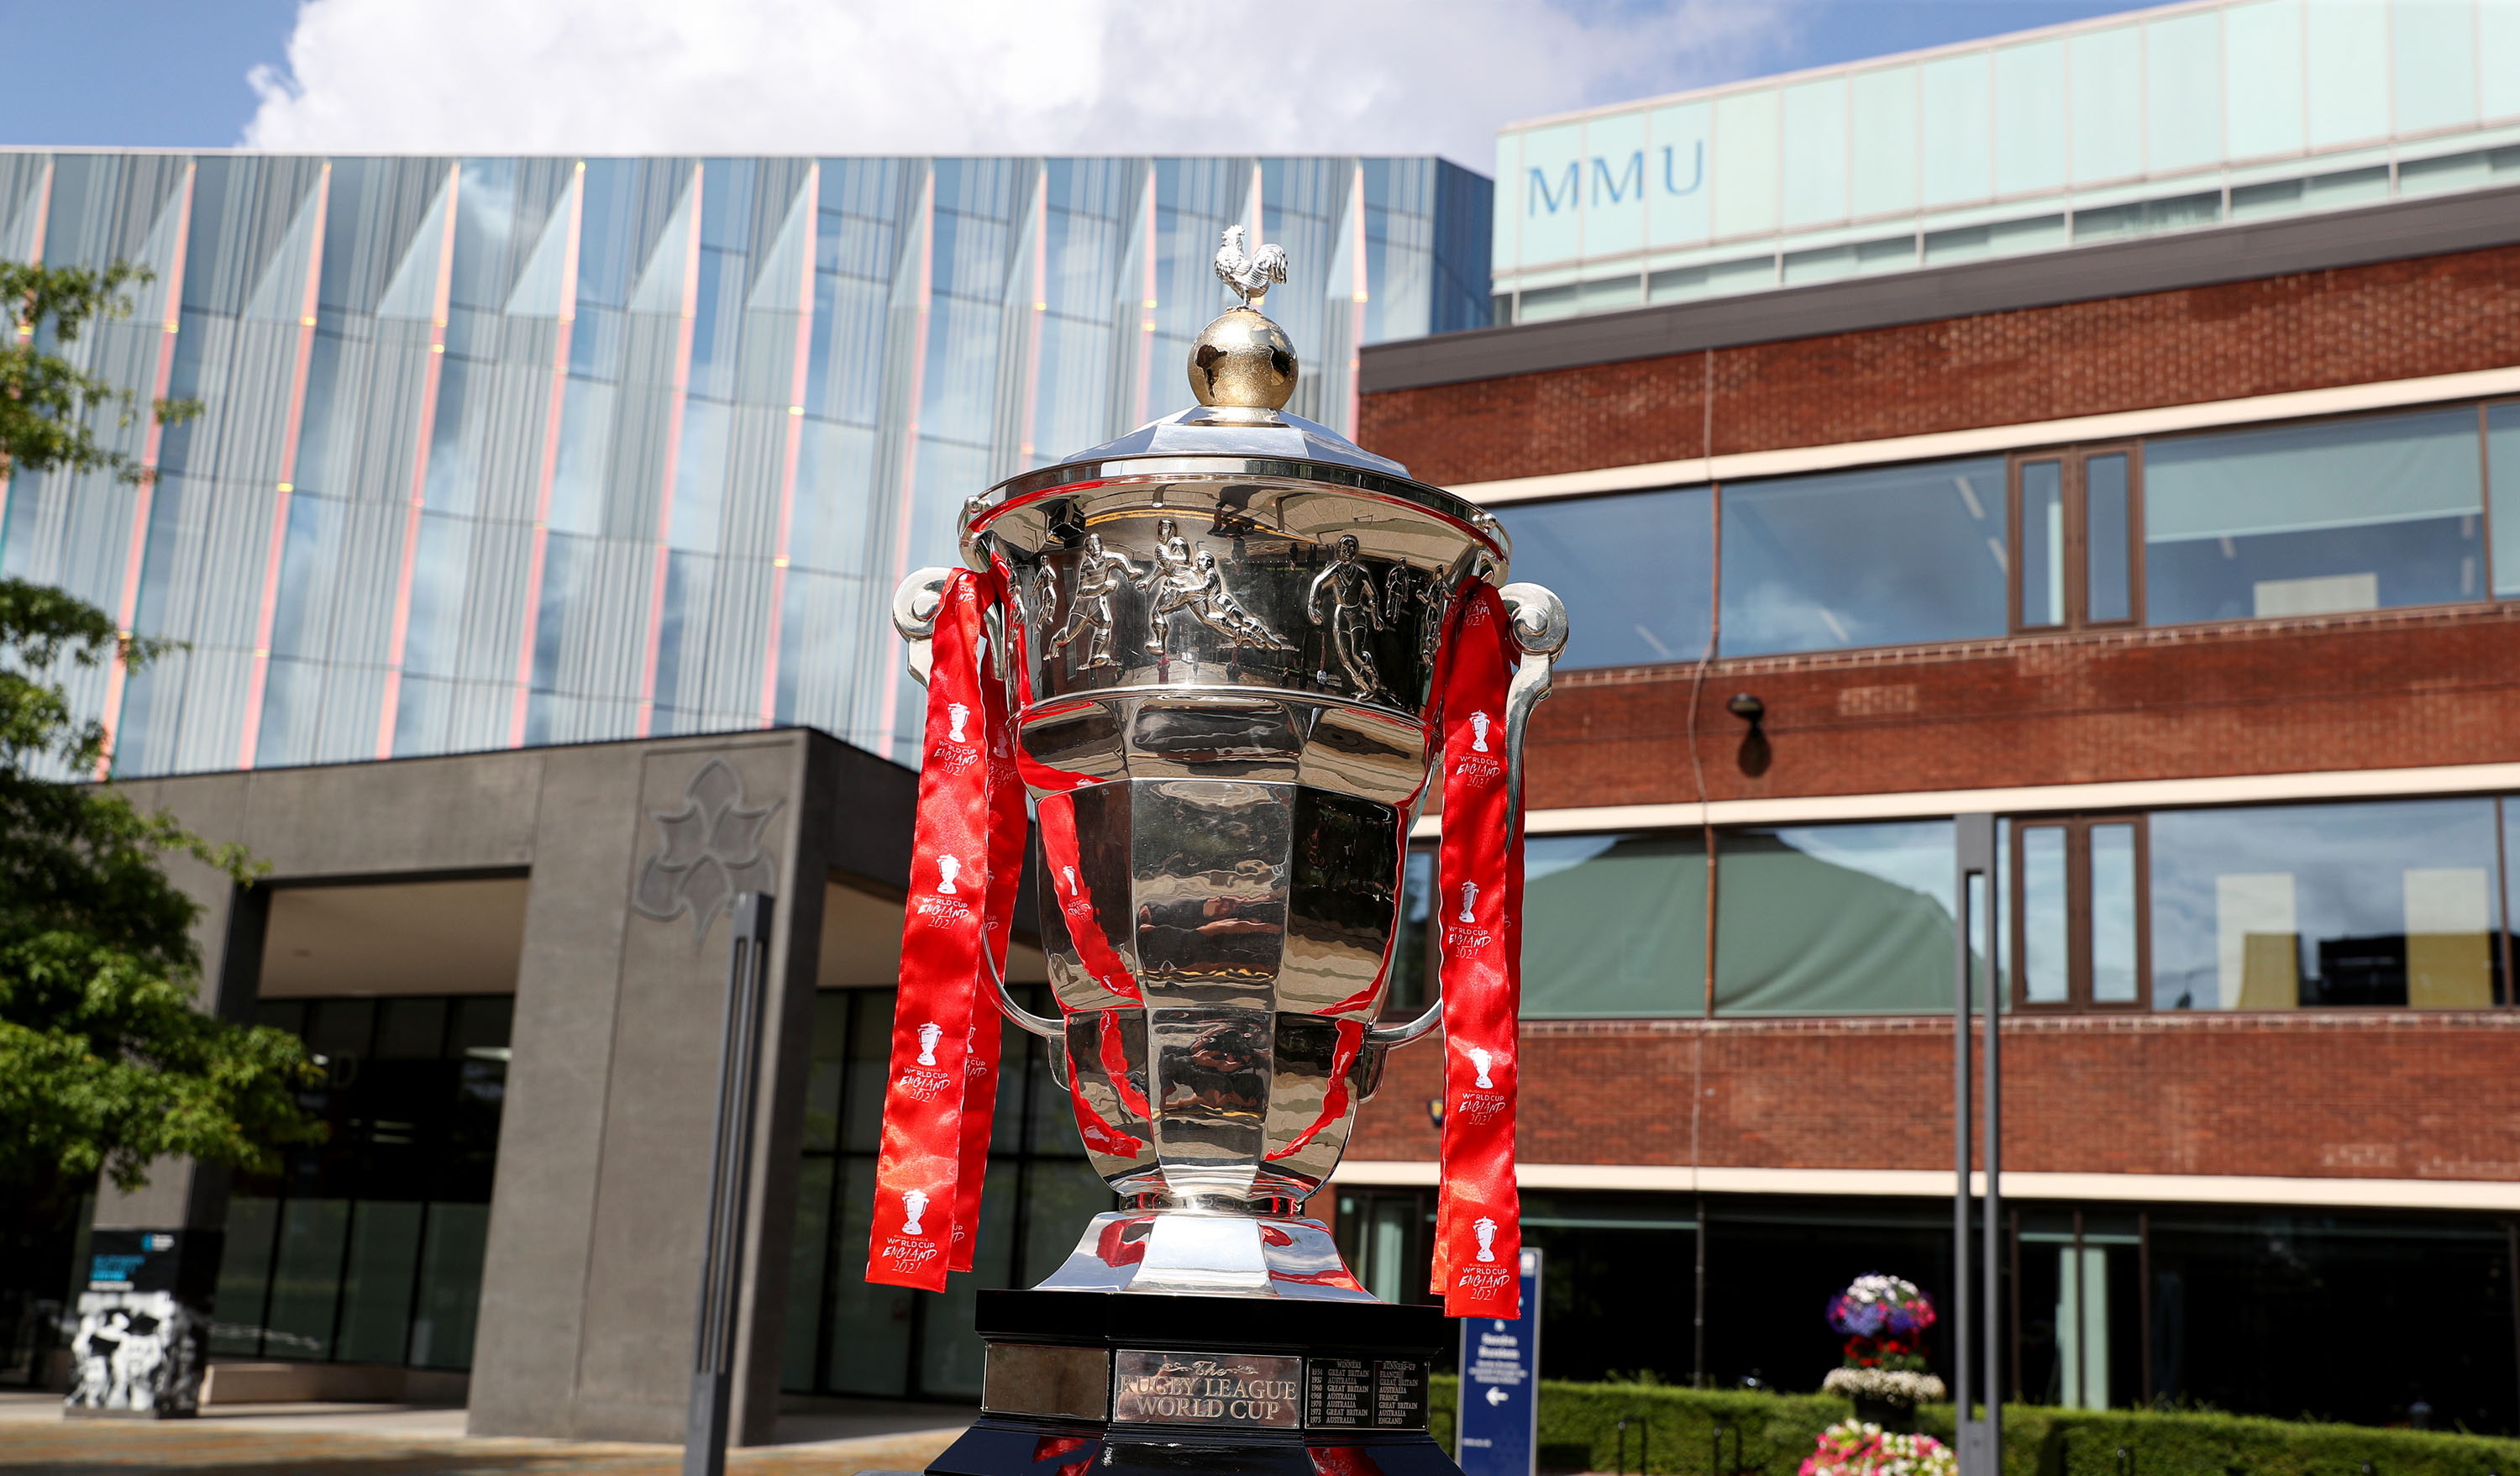 The Rugby League World Cup trophy at Manchester Metropolitan